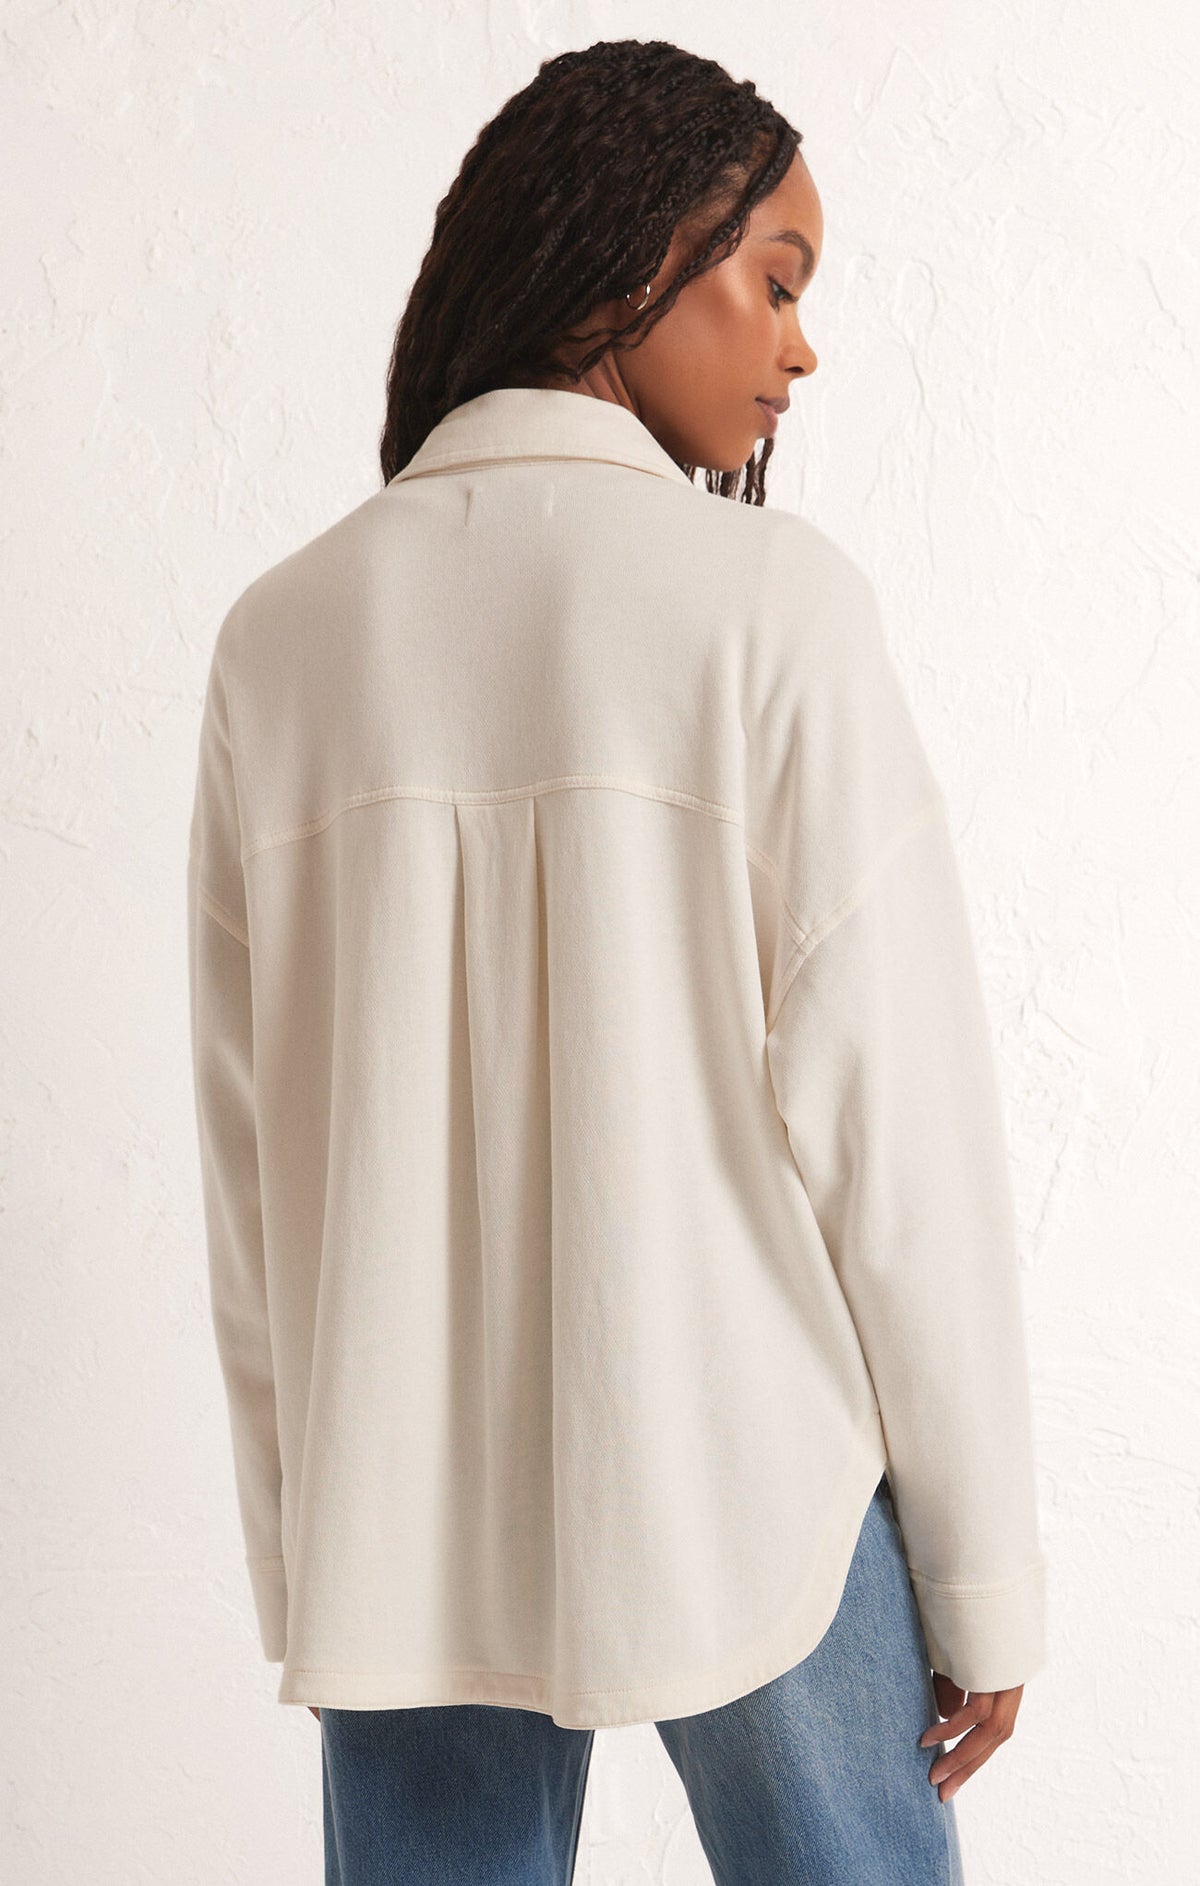 z supply all day knit jacket in sandstone - back view